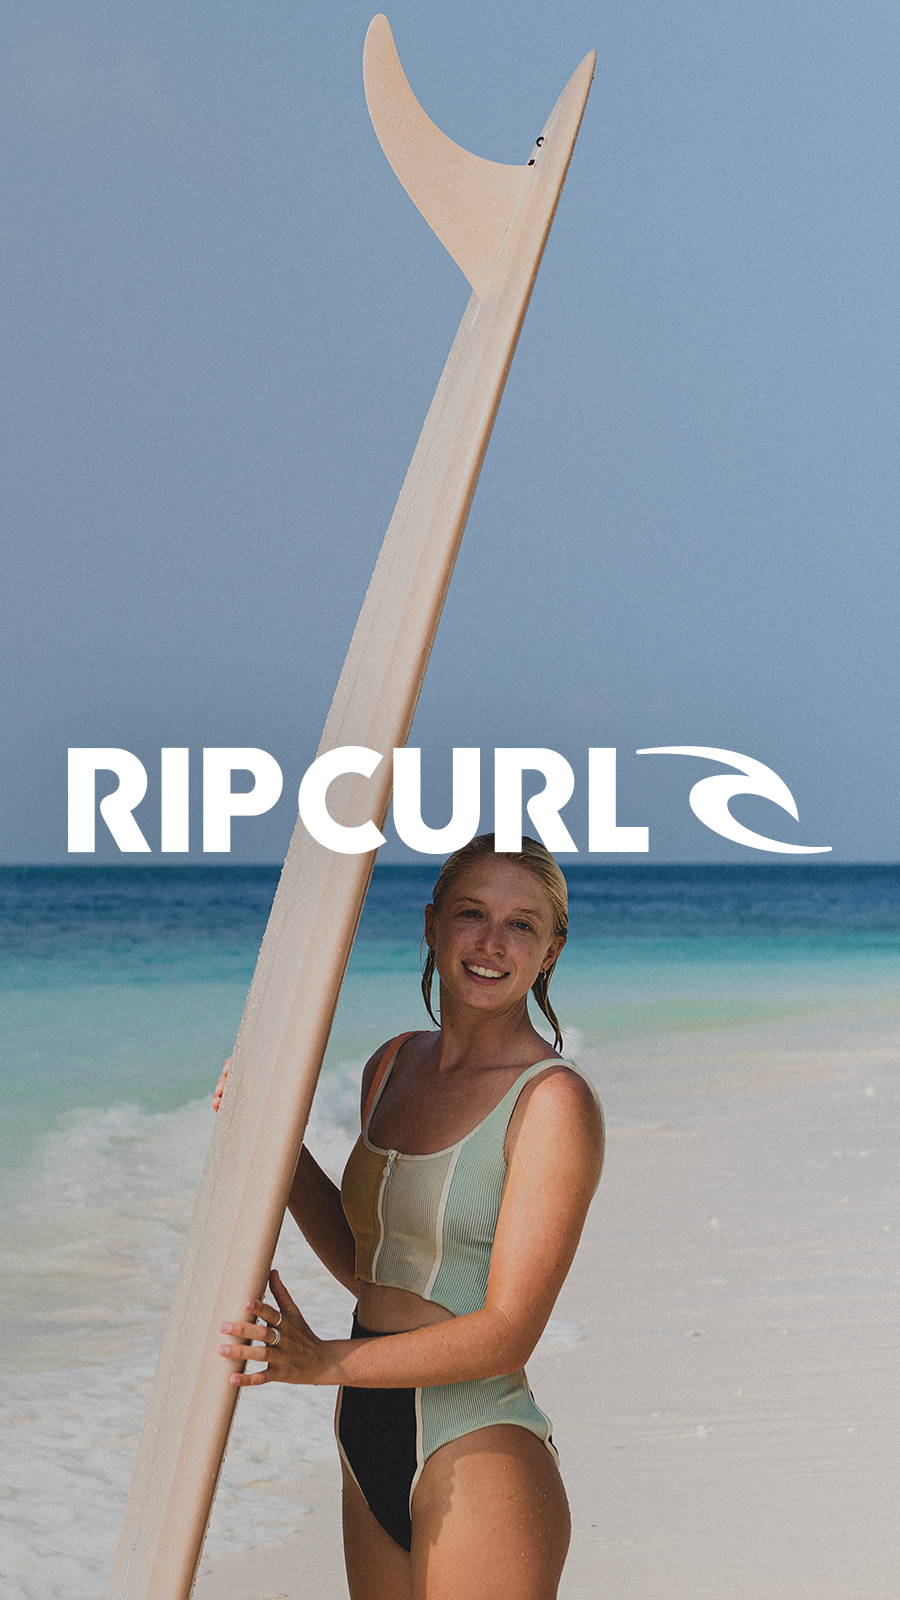 Young woman standing on beach in Rip Curl bathing suit holding up surf board